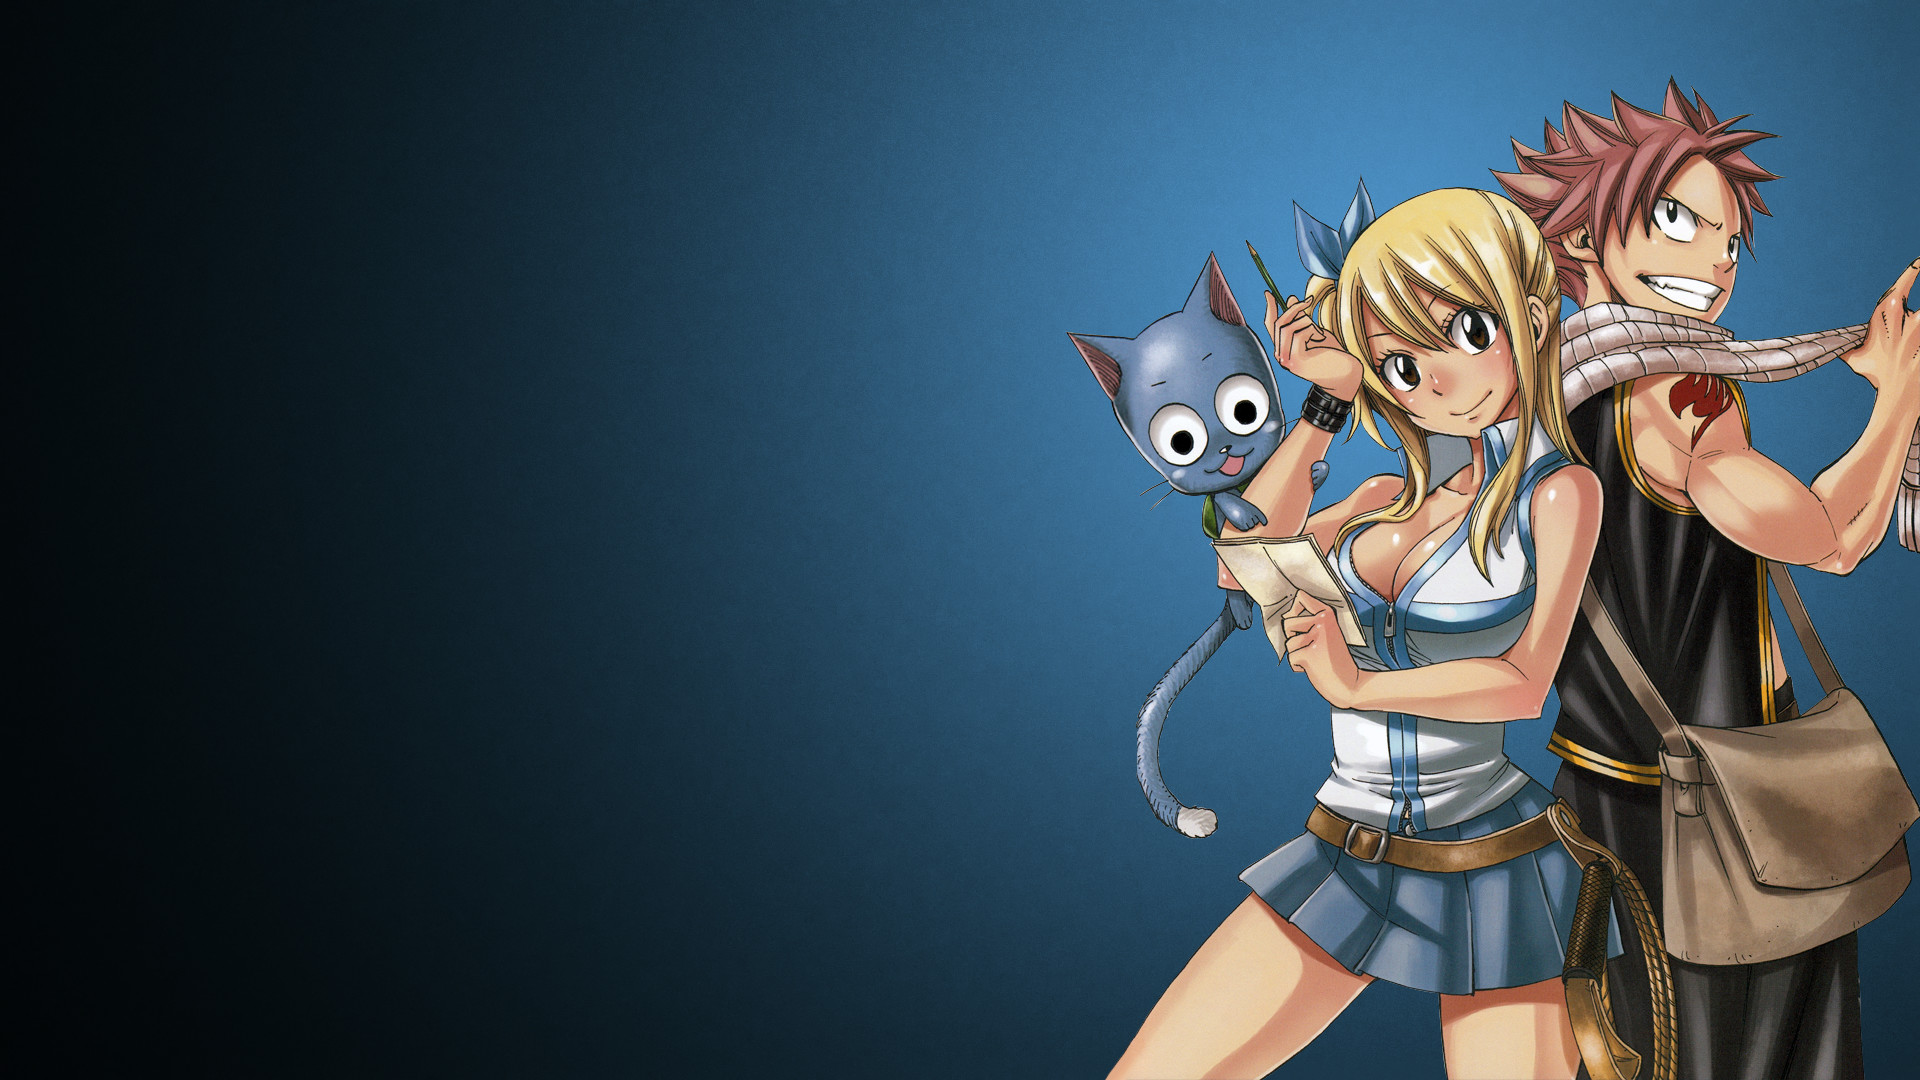 1920x1080 Fairy Tail Slayers Natsu And Lucy | HD Wallpaper ...